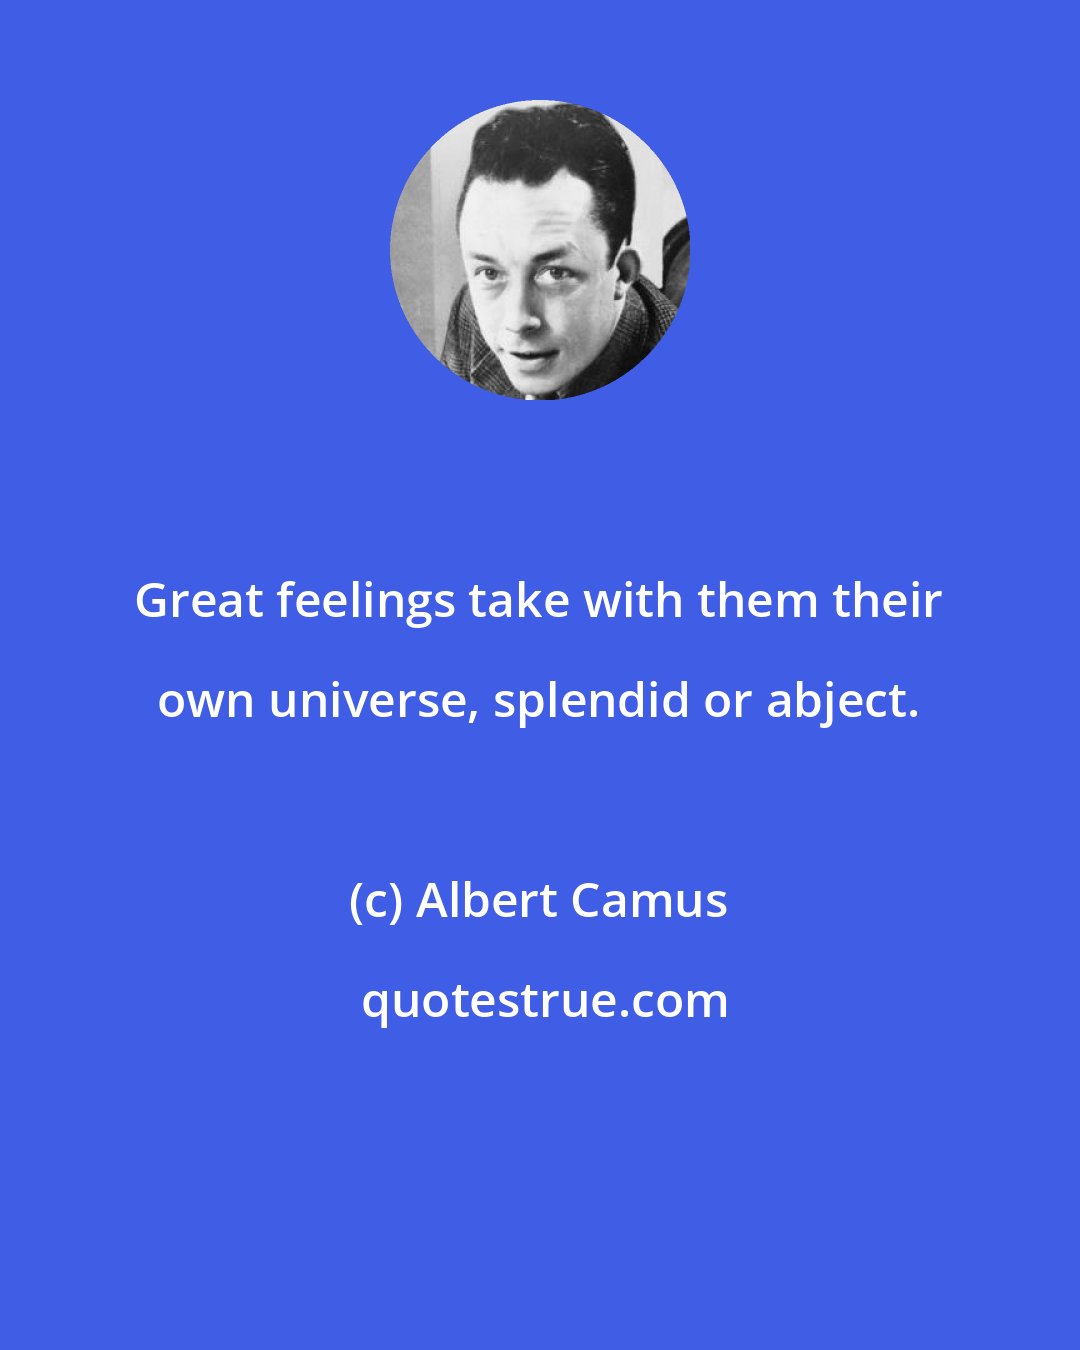 Albert Camus: Great feelings take with them their own universe, splendid or abject.